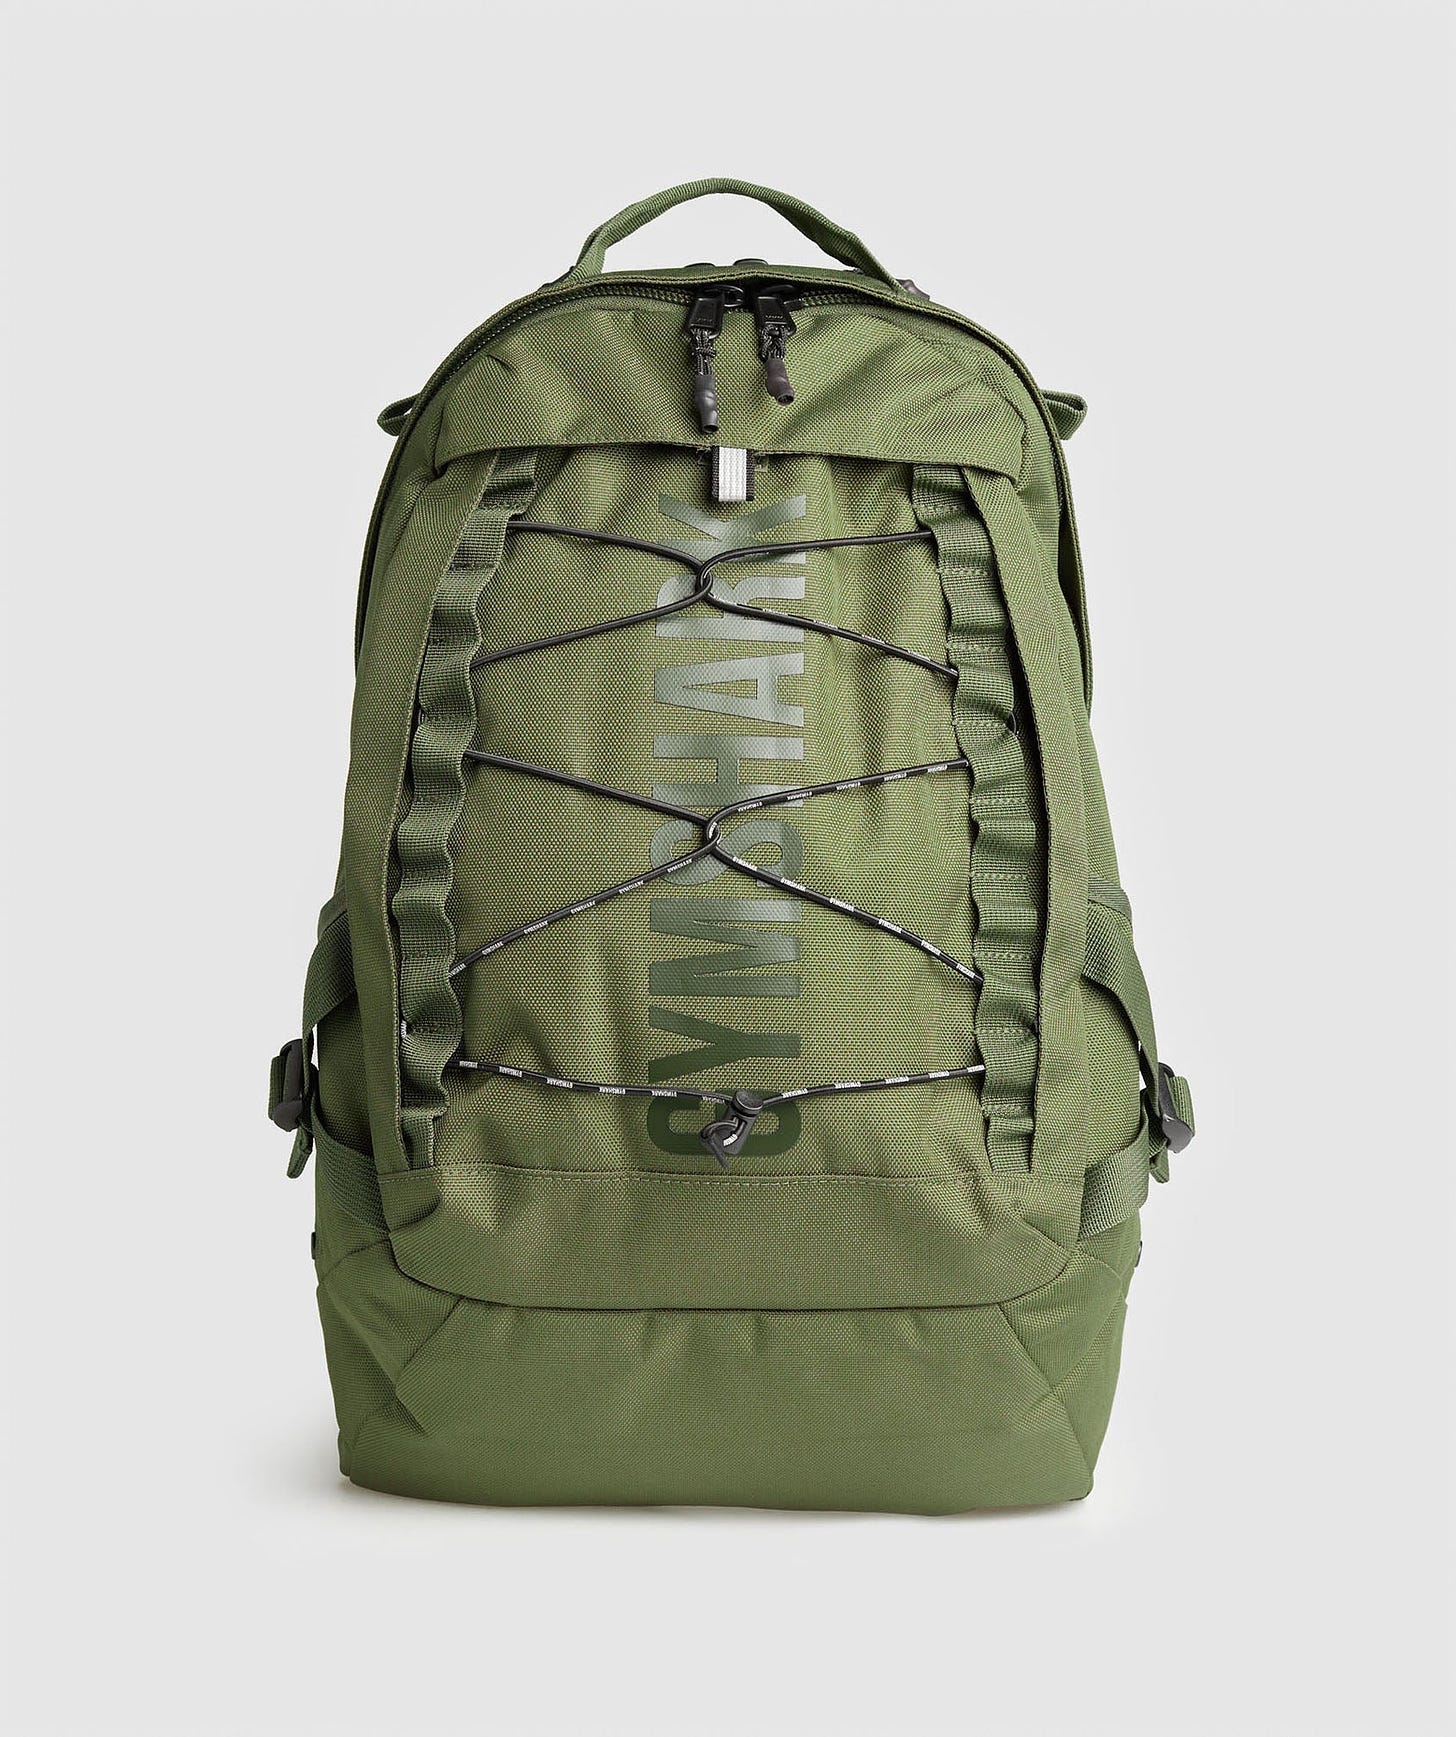 Pursuit Backpack product image 1